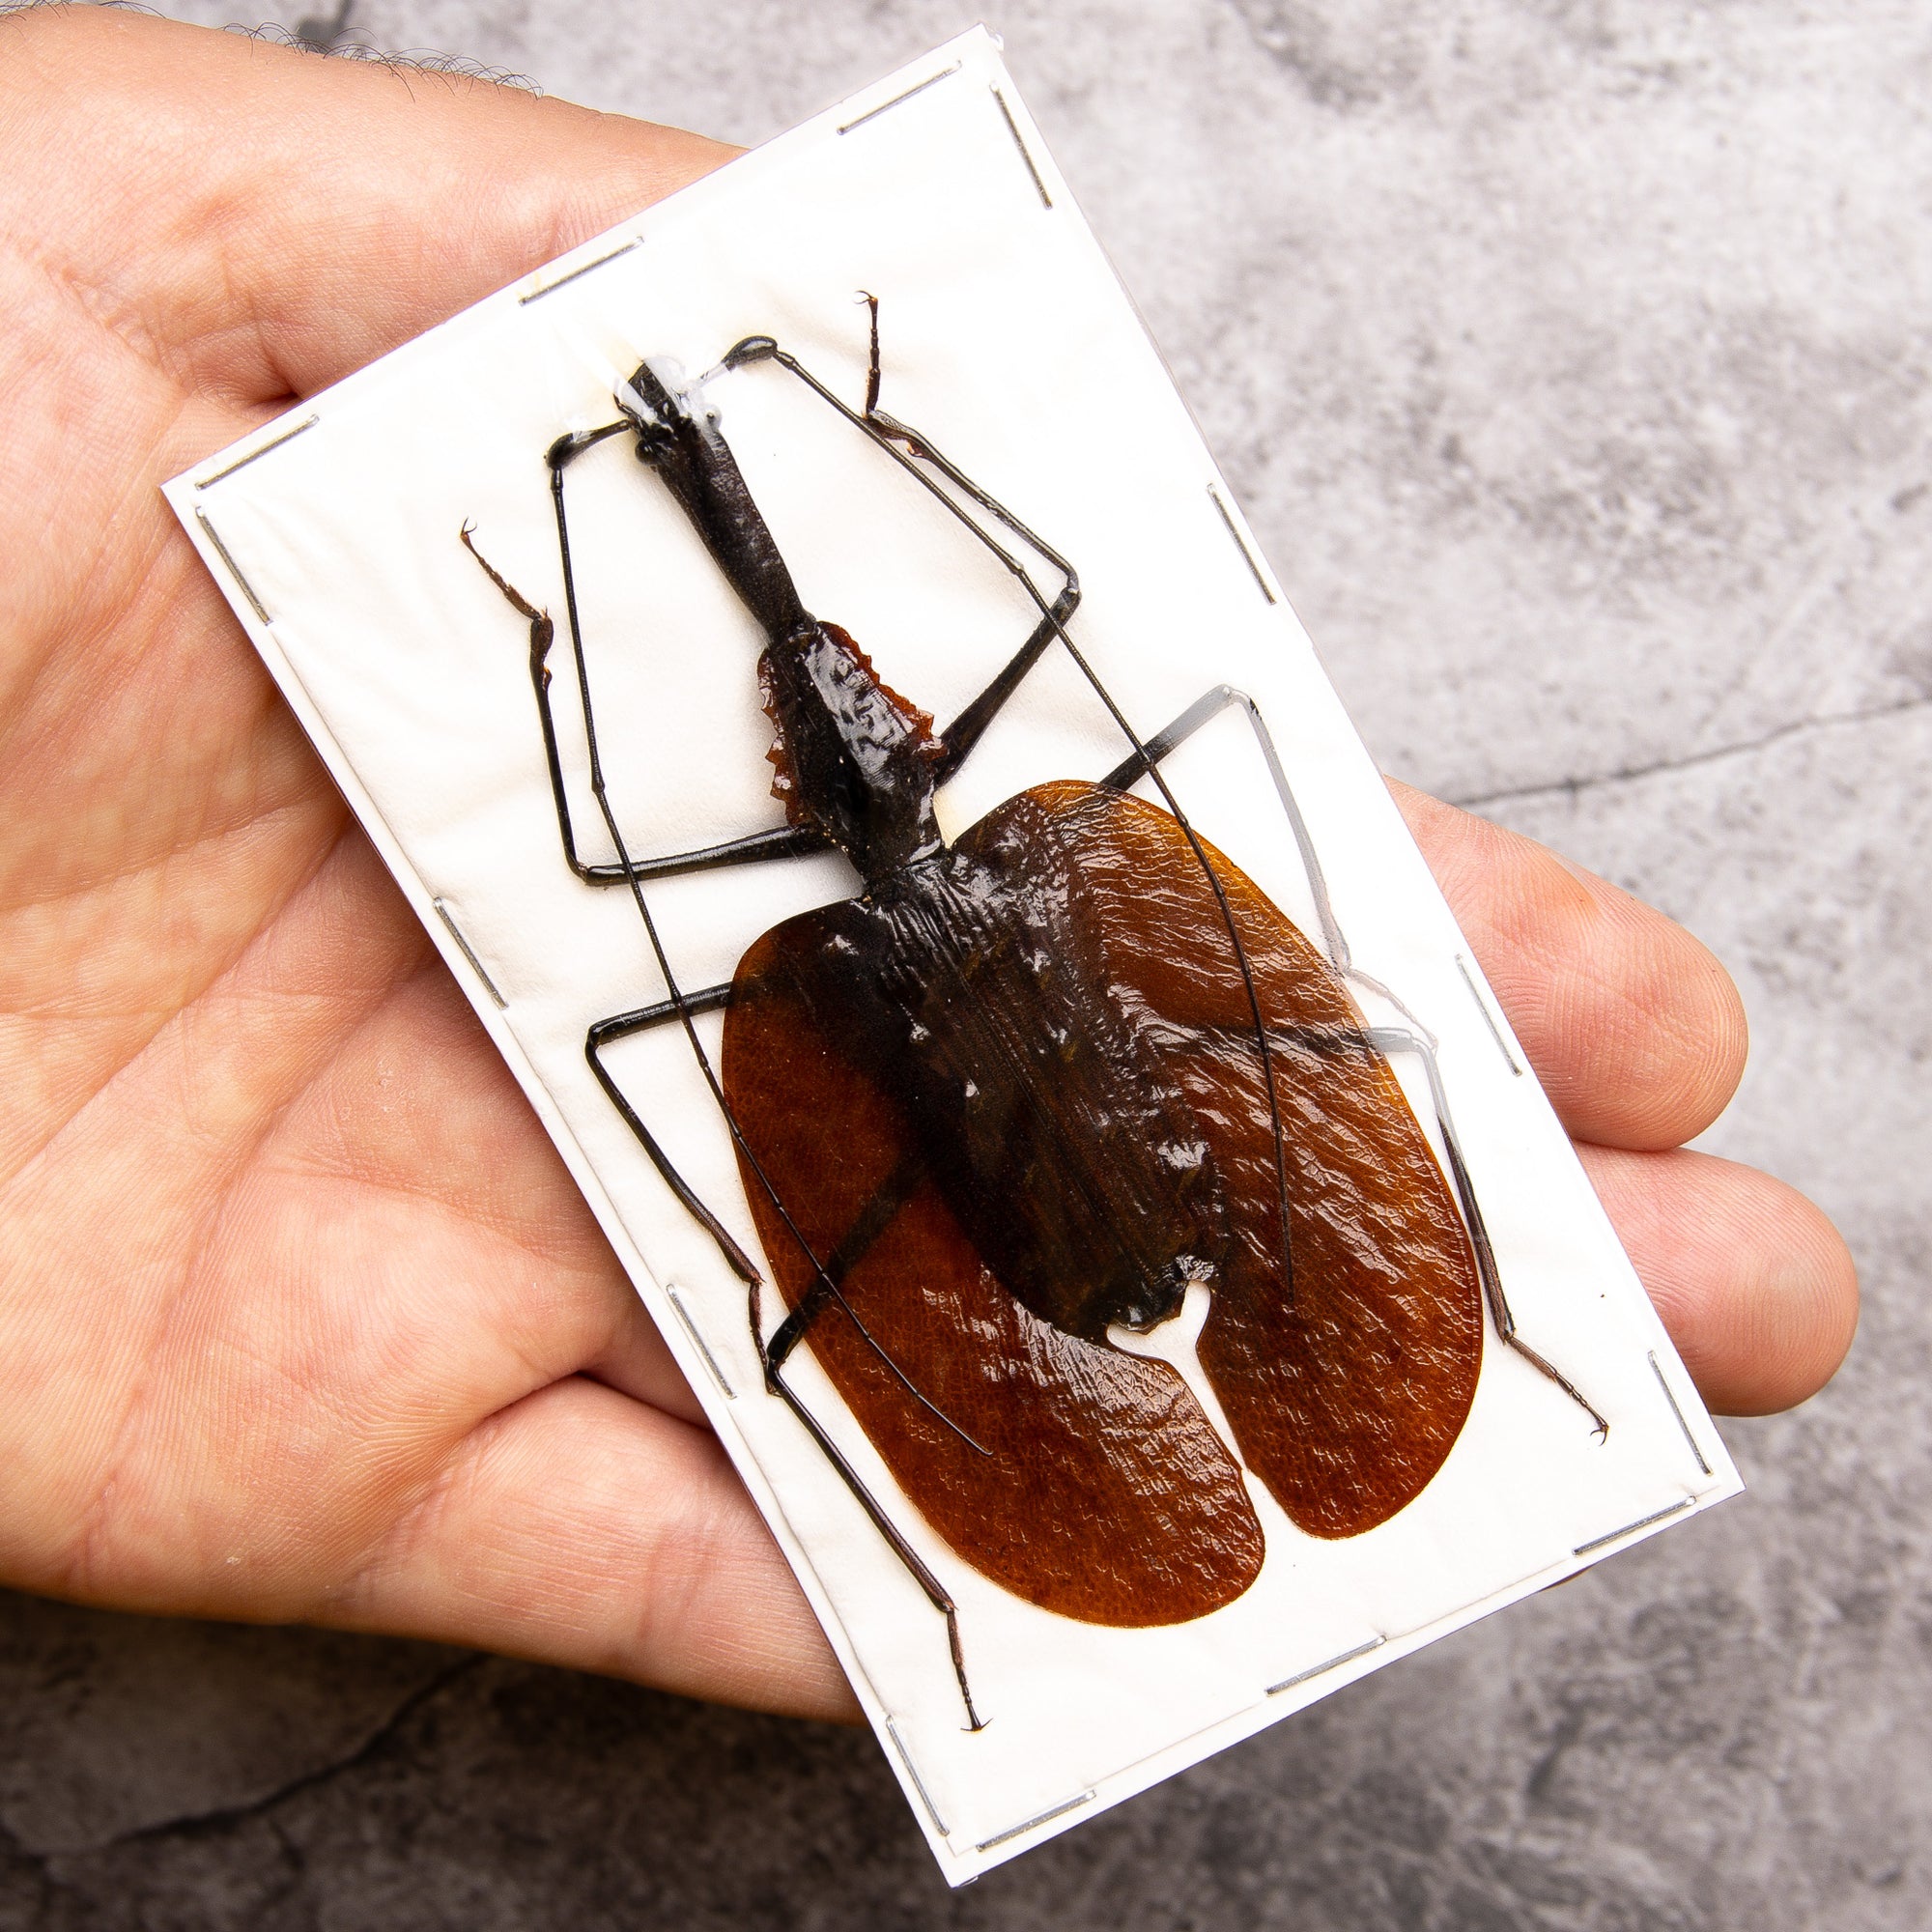 PACK OF 2 Violin Beetles (Choise of 4 sizes) Mormolyce phyllodes, A1 Real Entomology Specimens